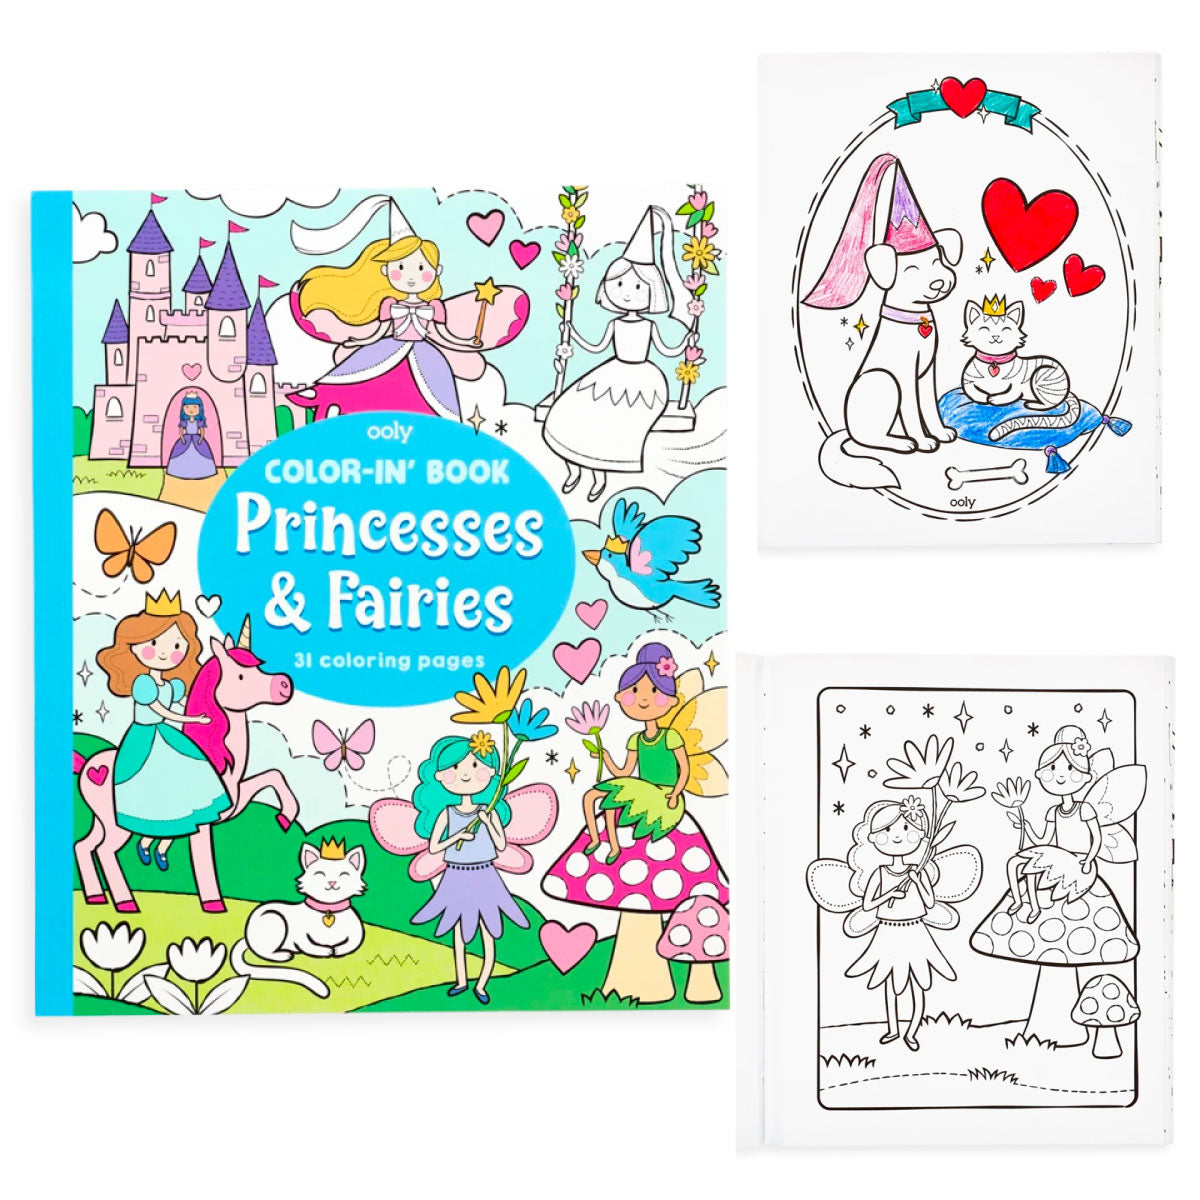 Princess & Fairies Color-In' Book from Ooly